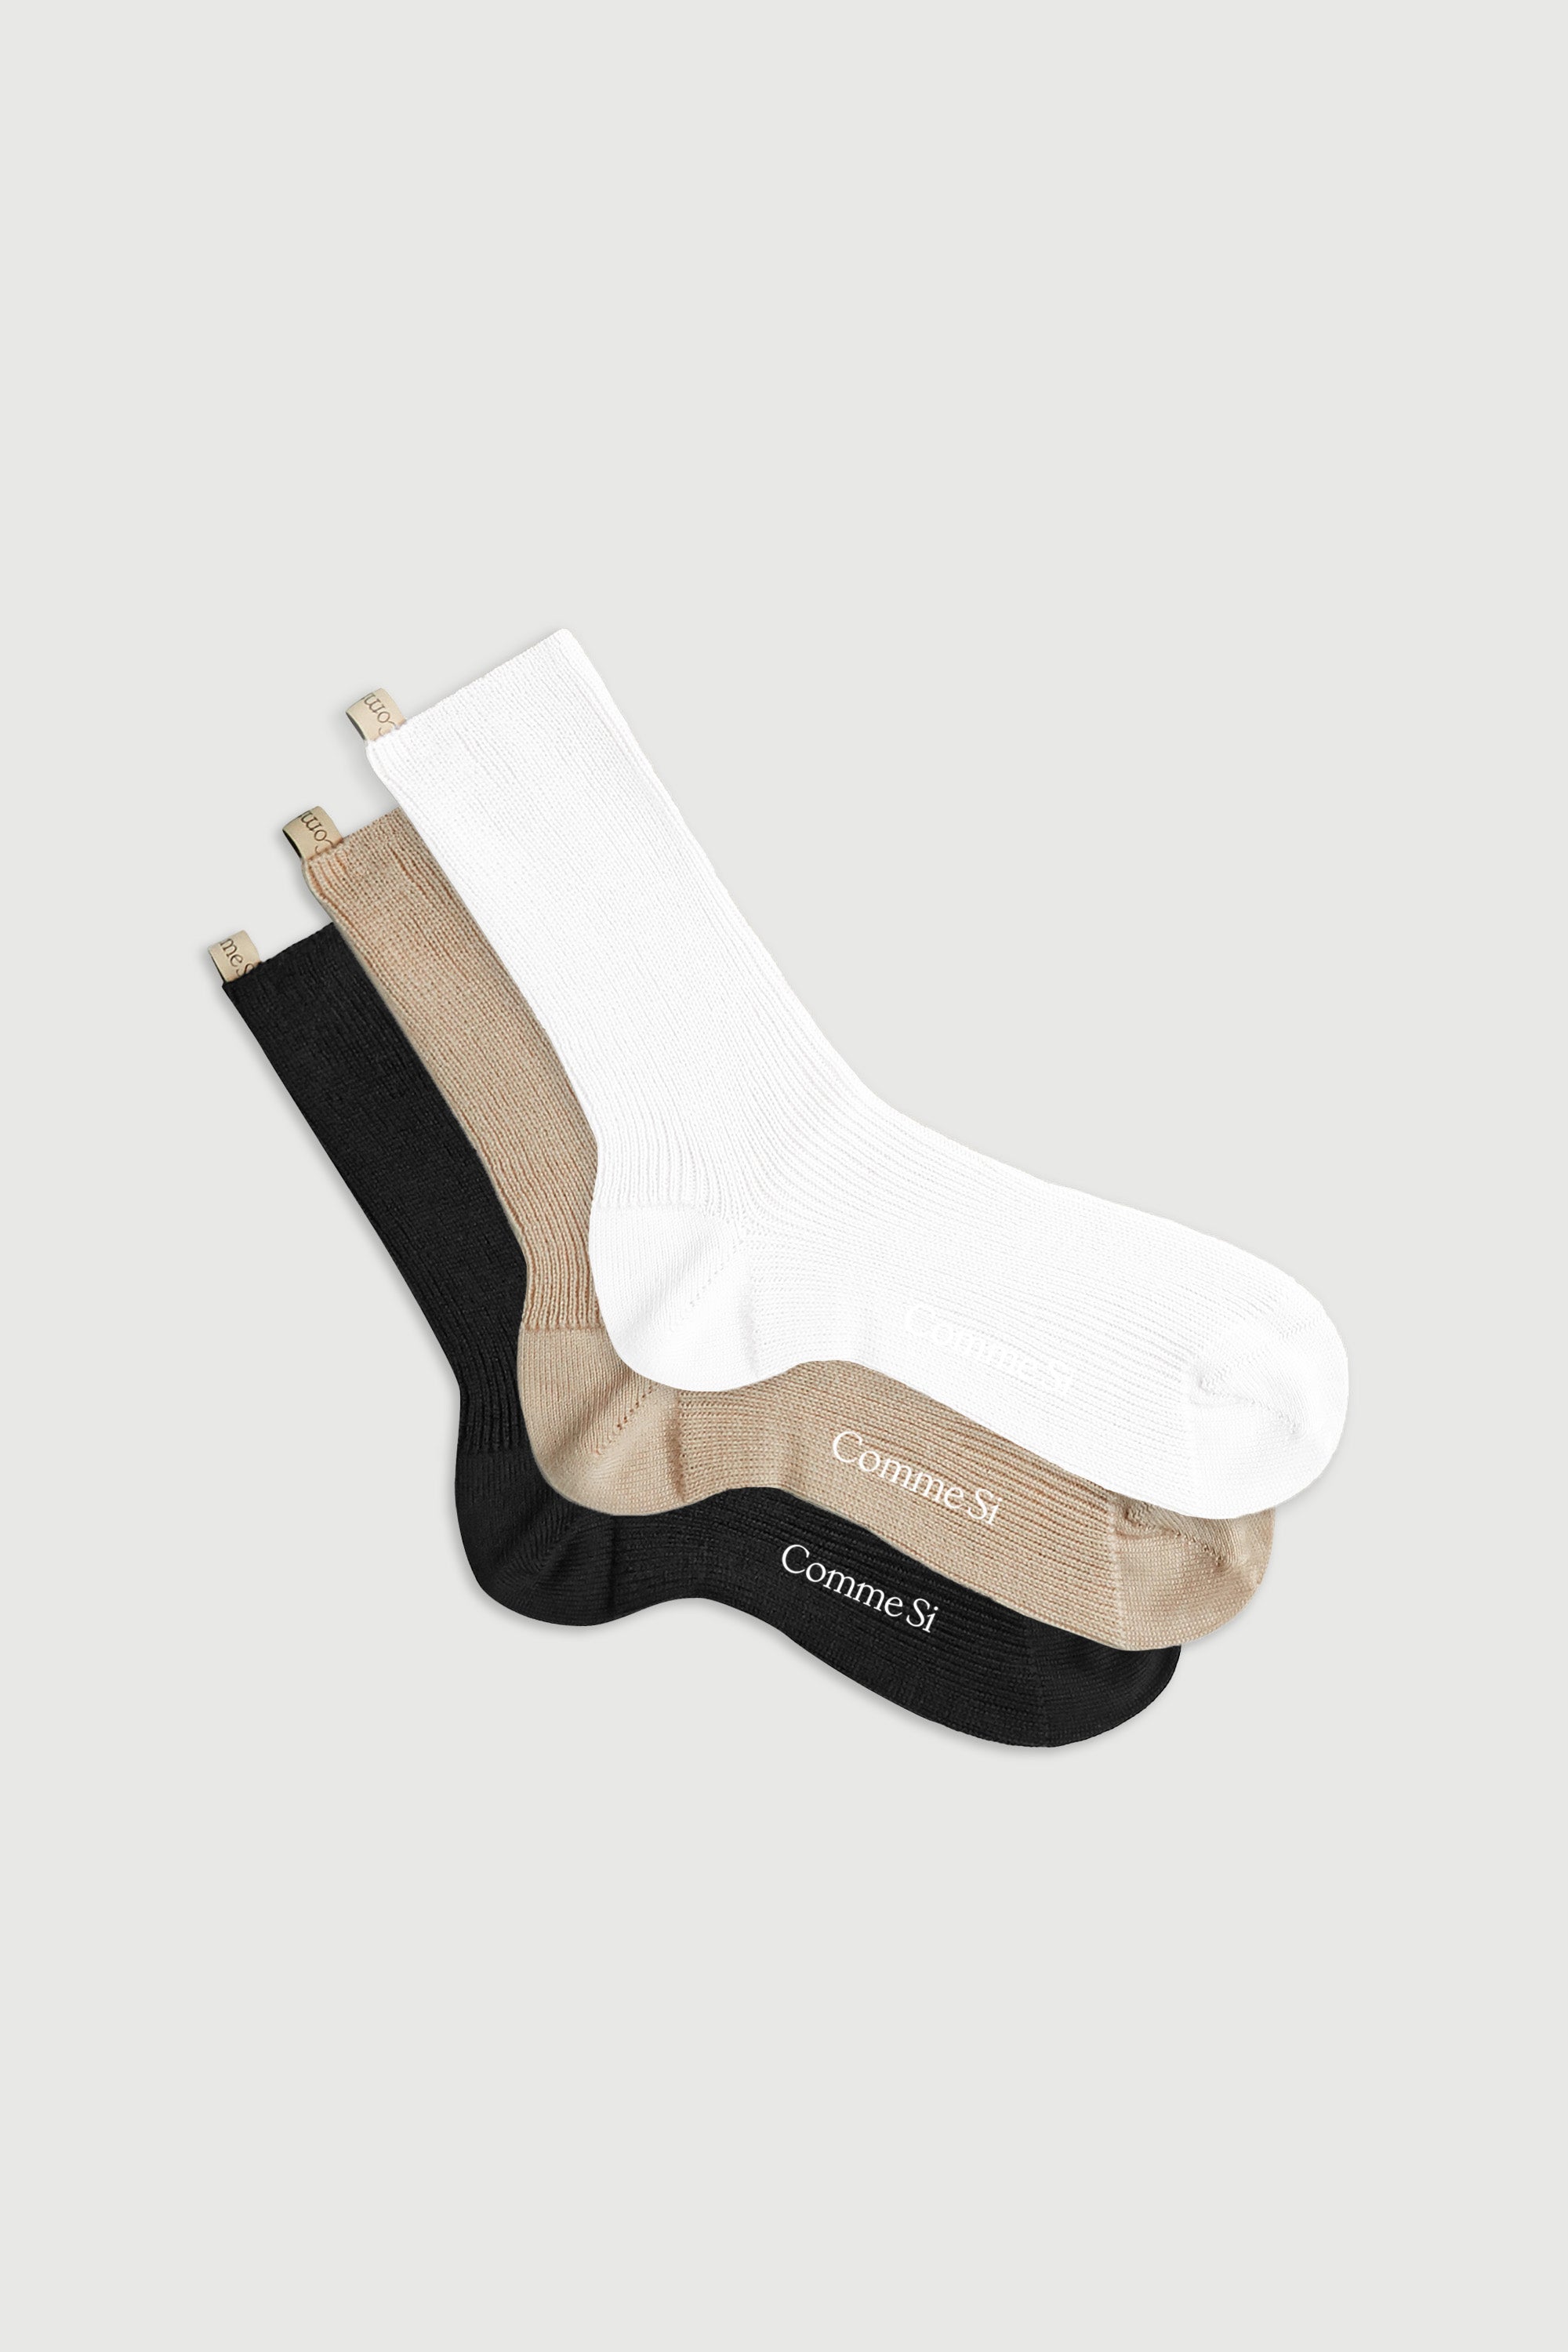 The merino trio in neutral, set of three merino wool socks, by Comme Si